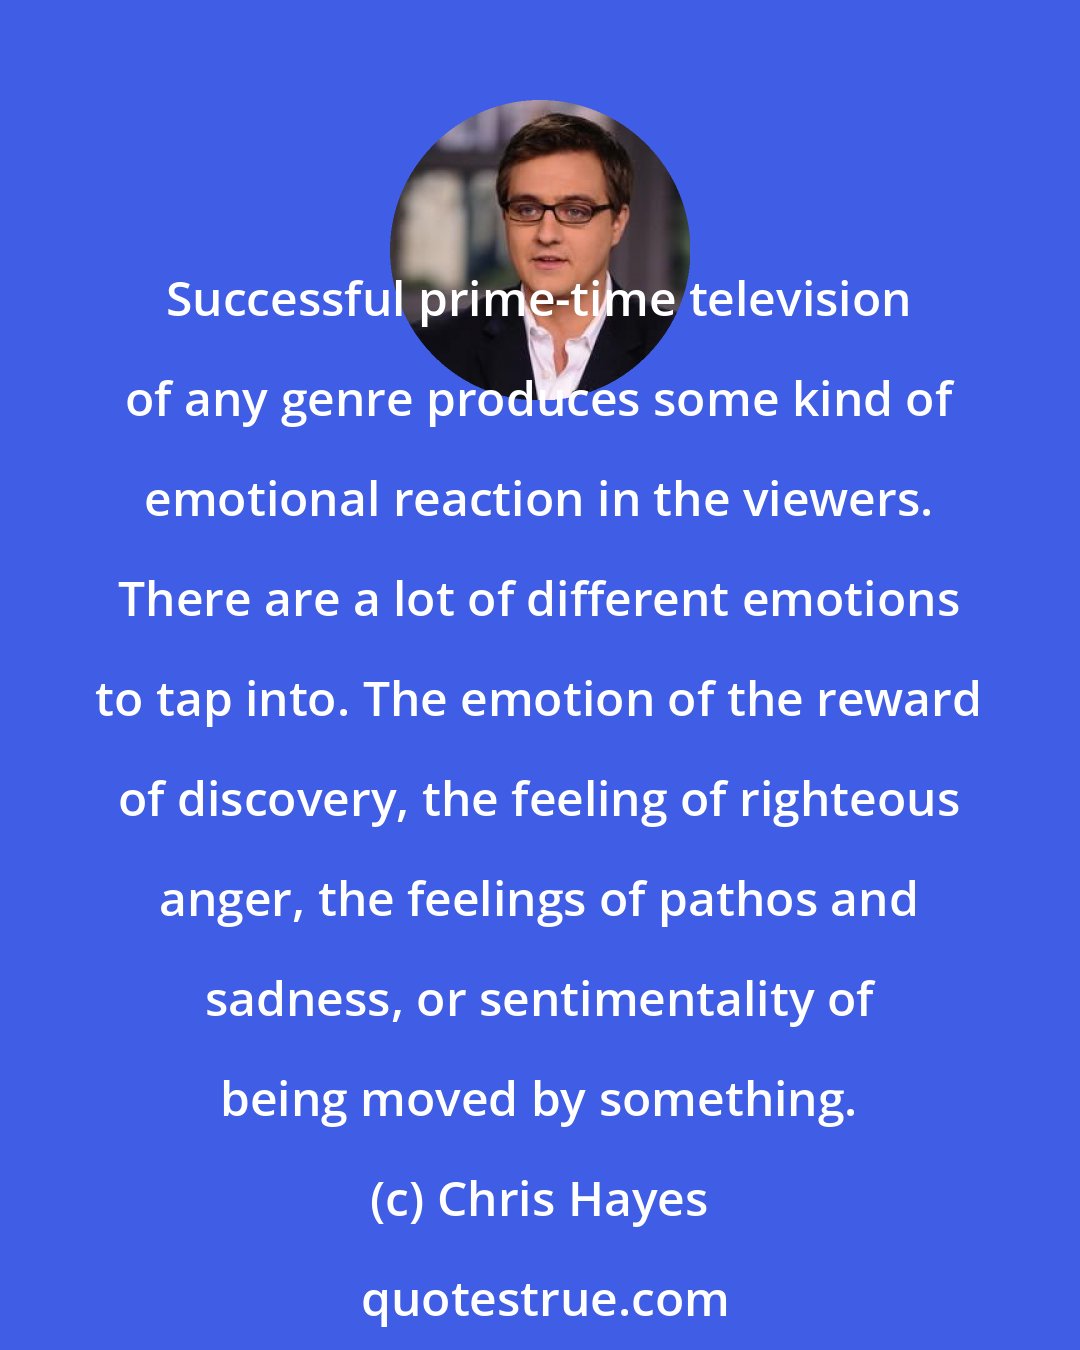 Chris Hayes: Successful prime-time television of any genre produces some kind of emotional reaction in the viewers. There are a lot of different emotions to tap into. The emotion of the reward of discovery, the feeling of righteous anger, the feelings of pathos and sadness, or sentimentality of being moved by something.